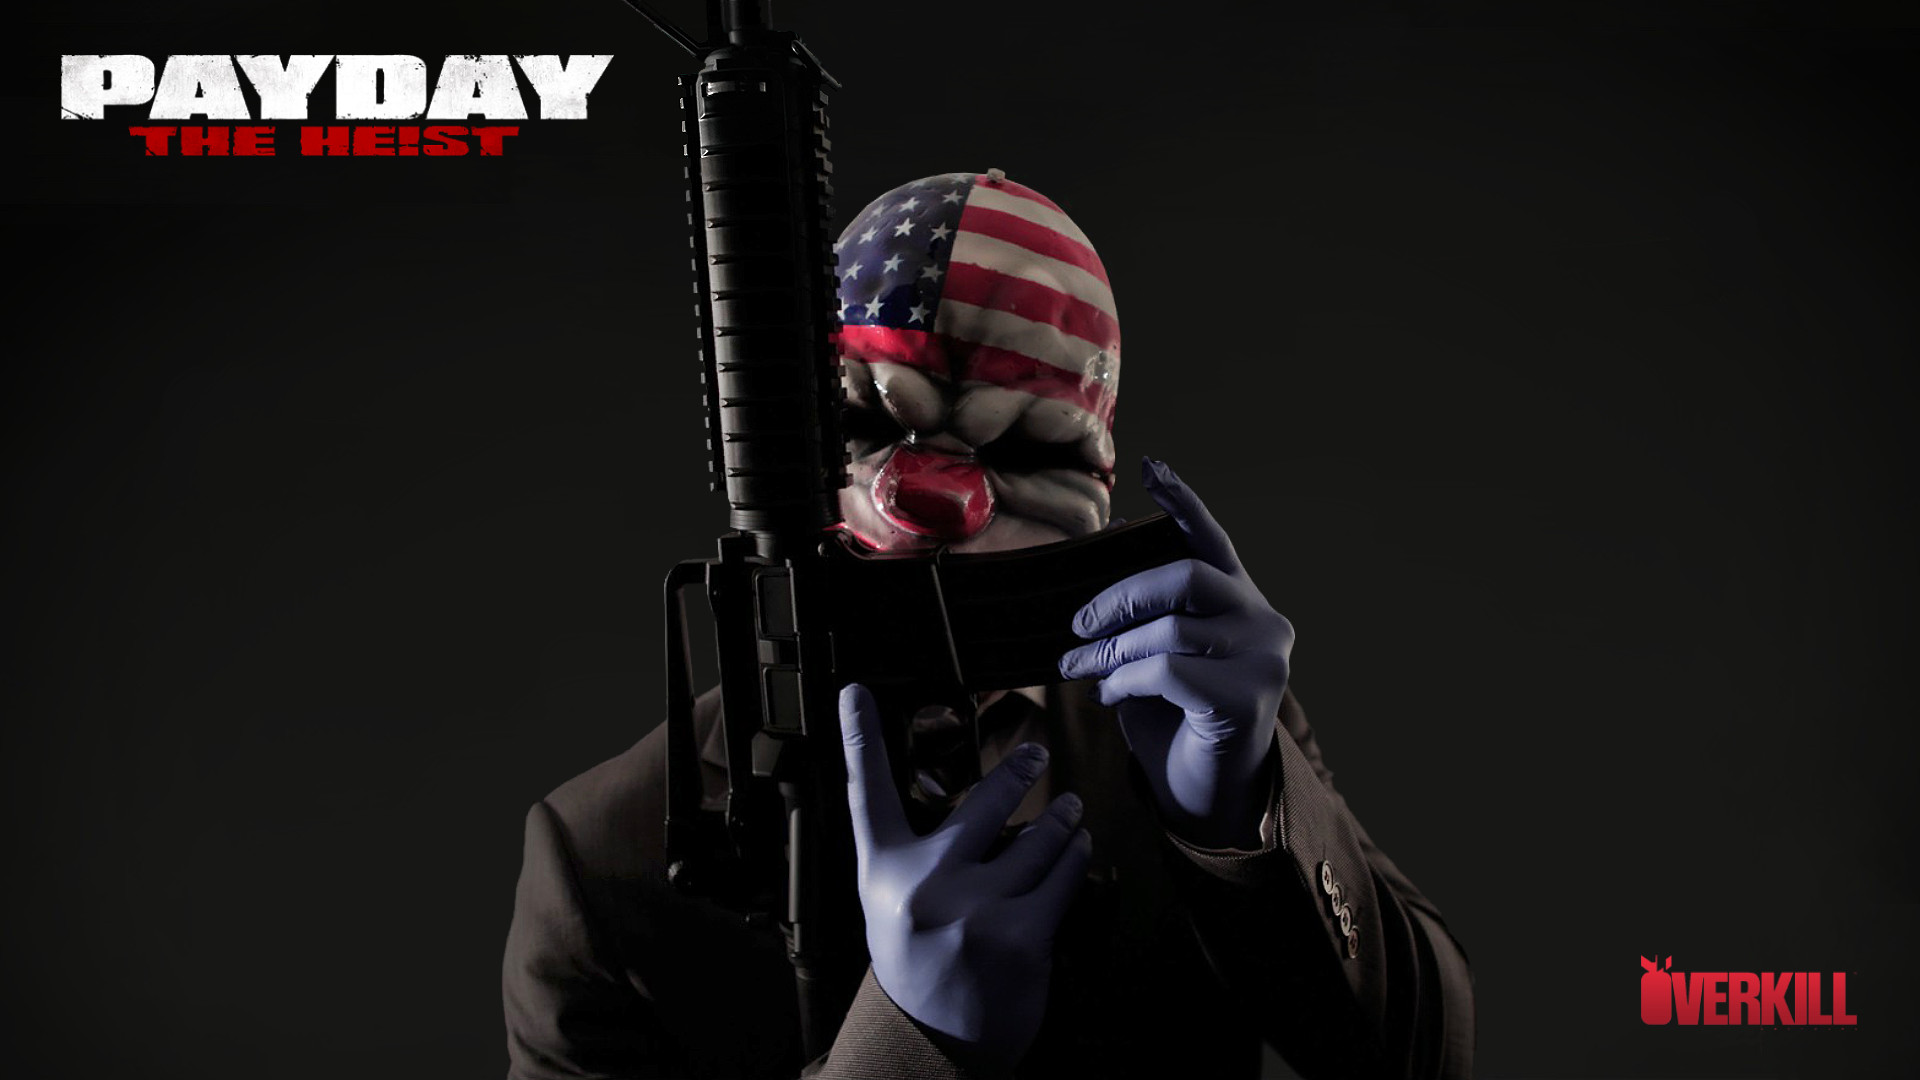 Digital if Payday the heist Dallas Wallpapers